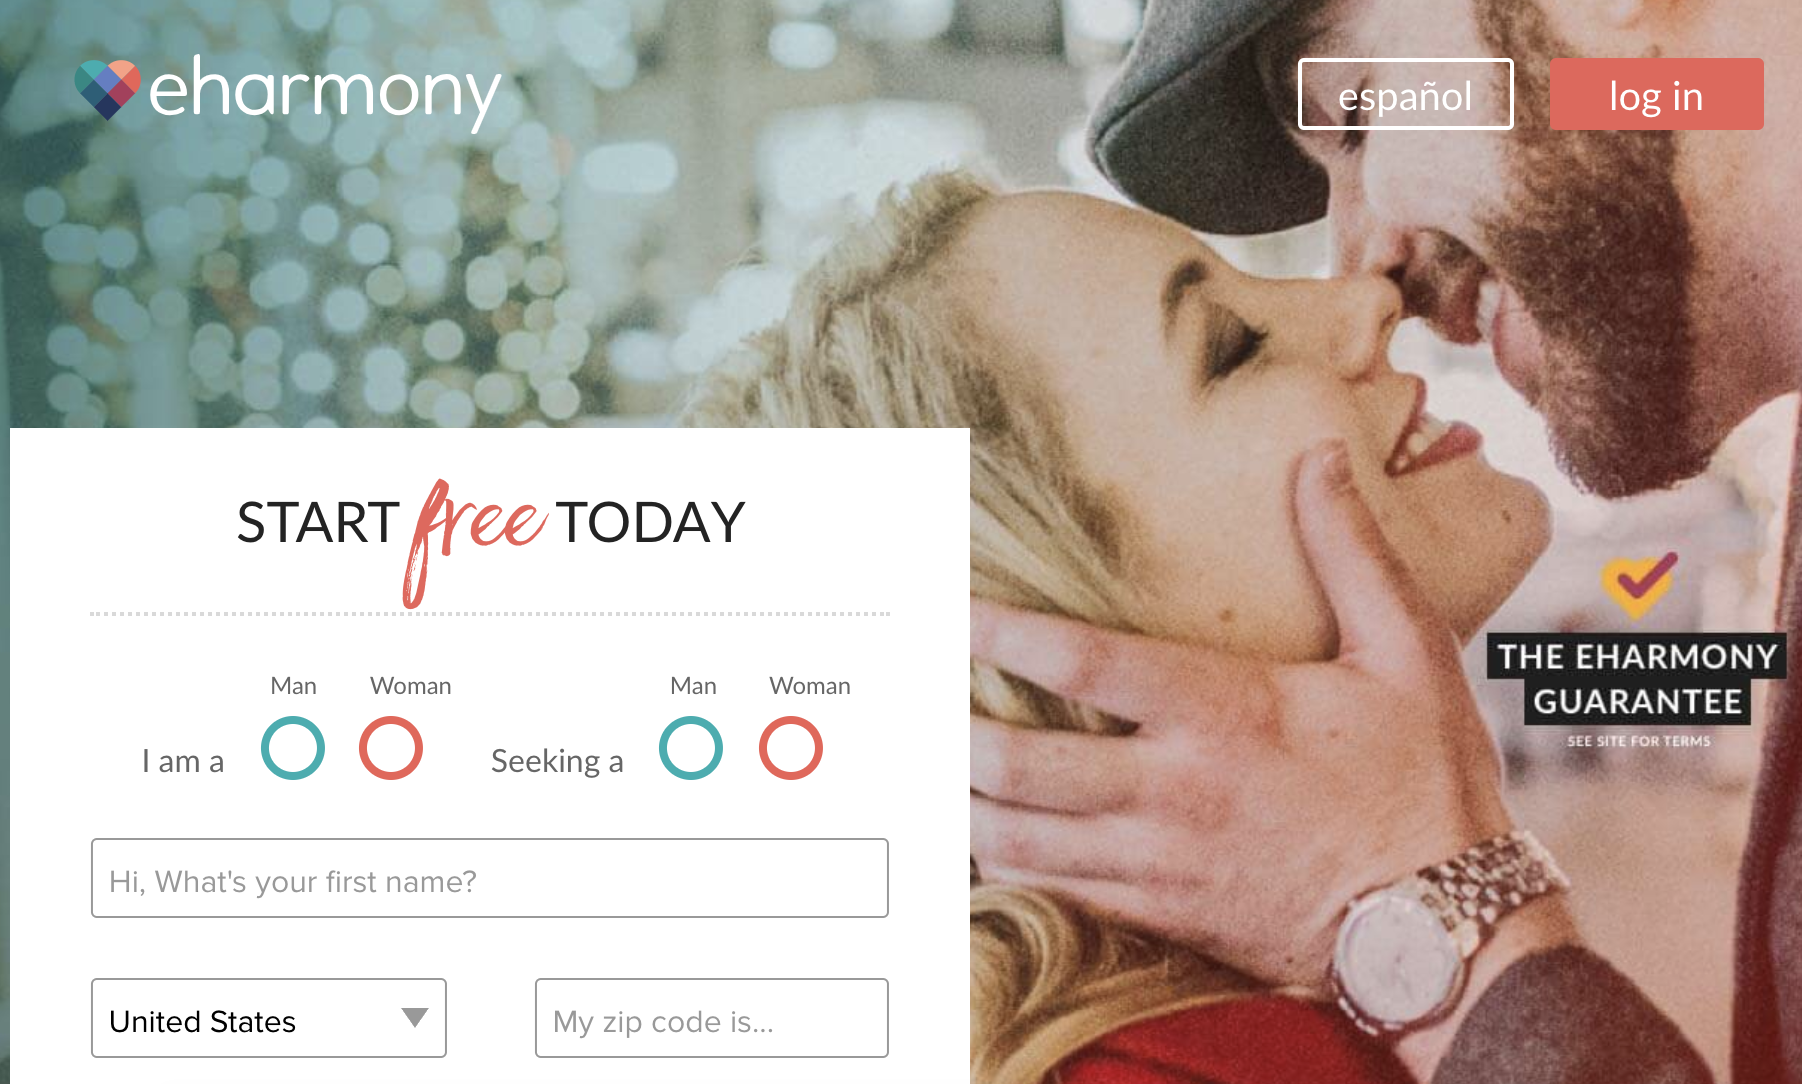 eHarmony review: A good site for quality relationships?